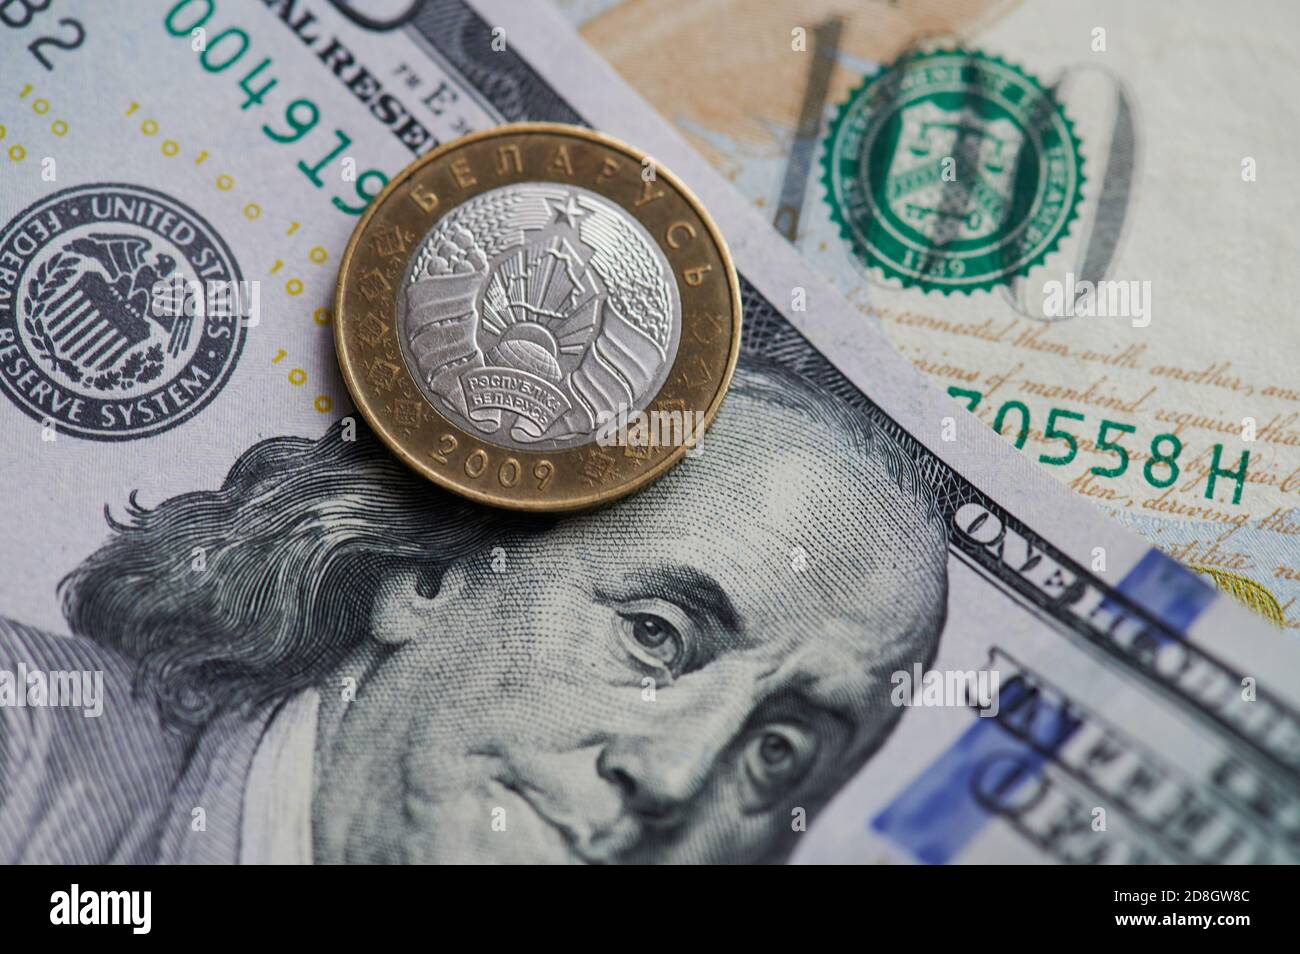 Small belarus metal coin on usa dollar bill close up view Stock Photo